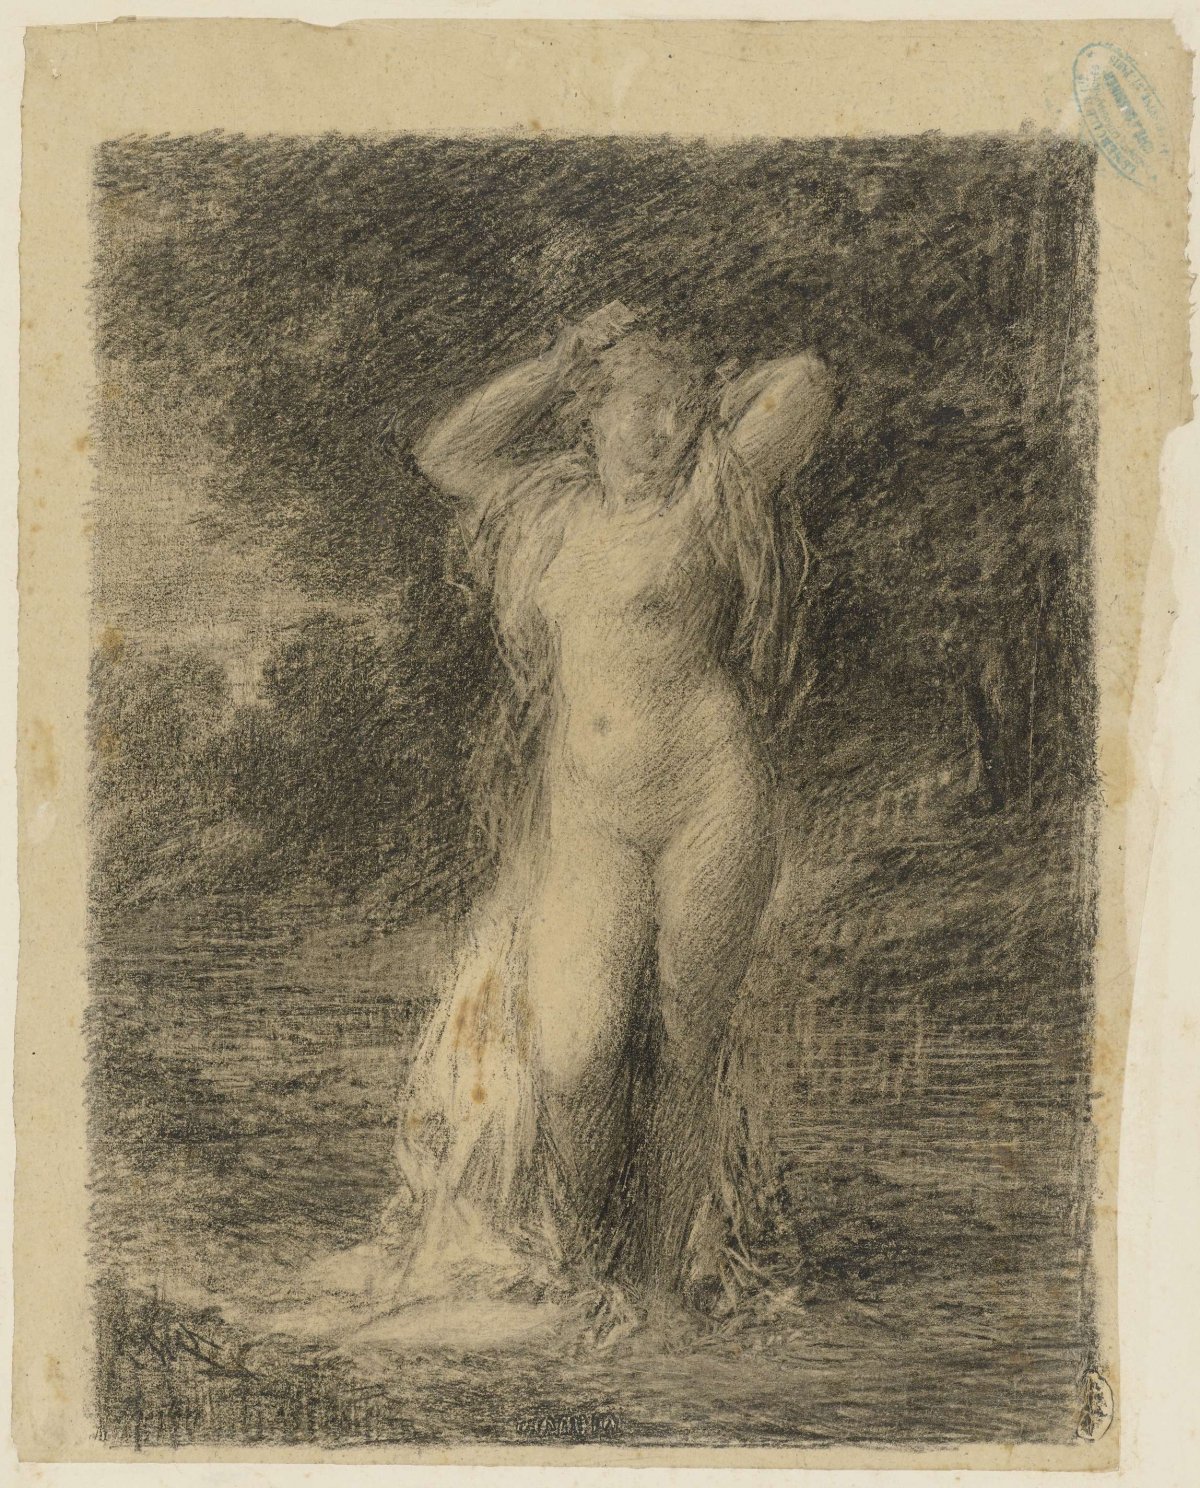 Standing nude woman in a forest landscape with water, Henri Fantin-Latour, c. 1846 - c. 1904